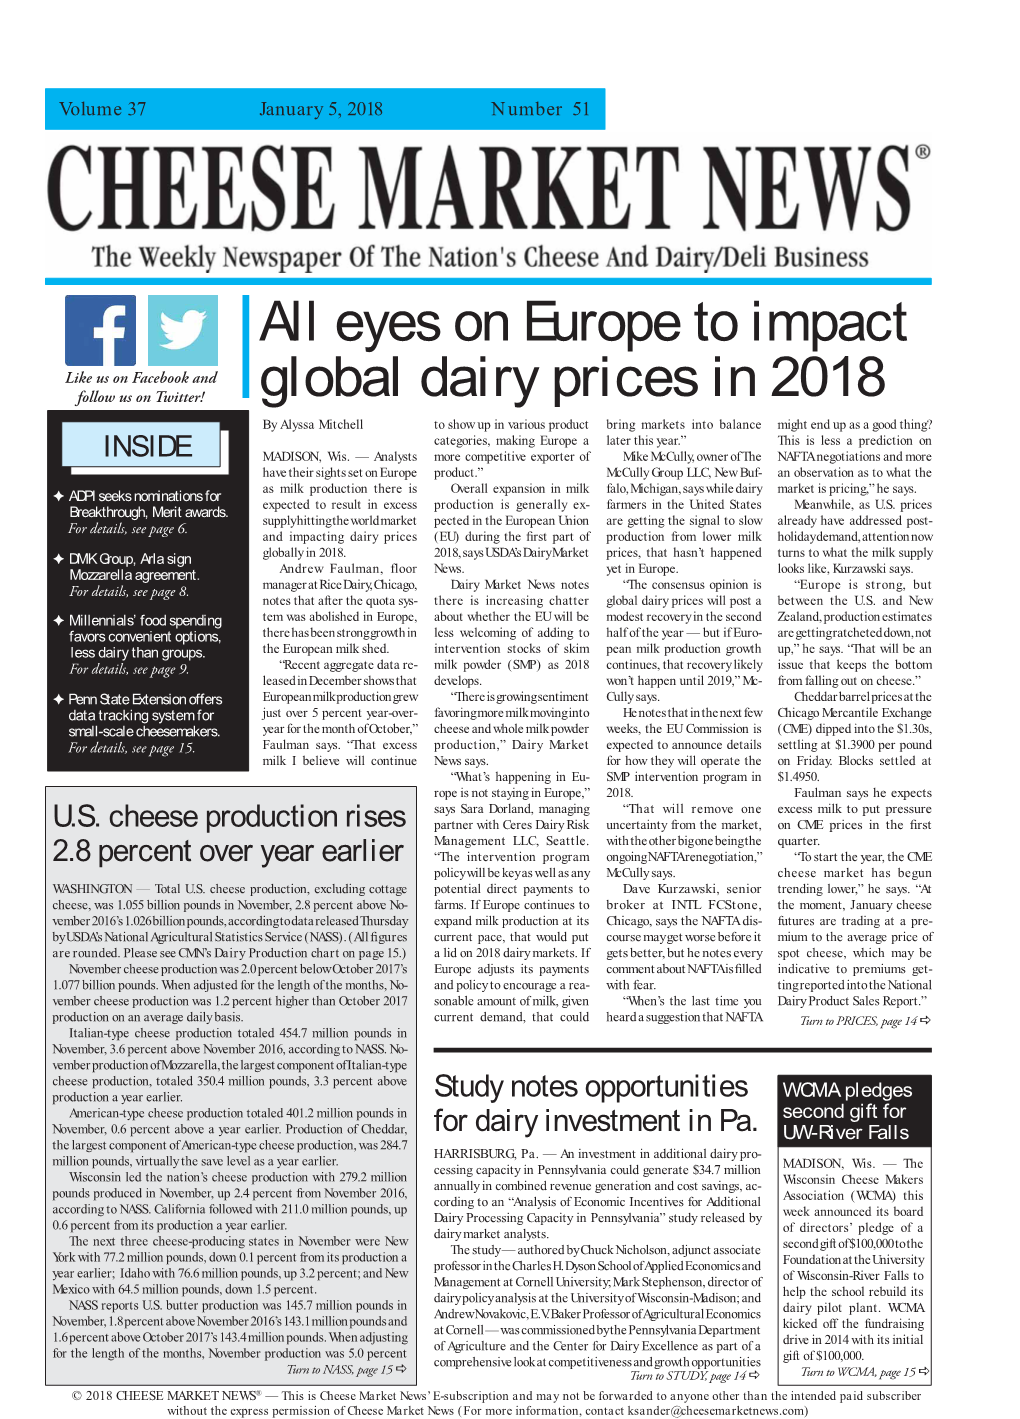 Eyes on Europe to Impact Global Dairy Prices in 2018